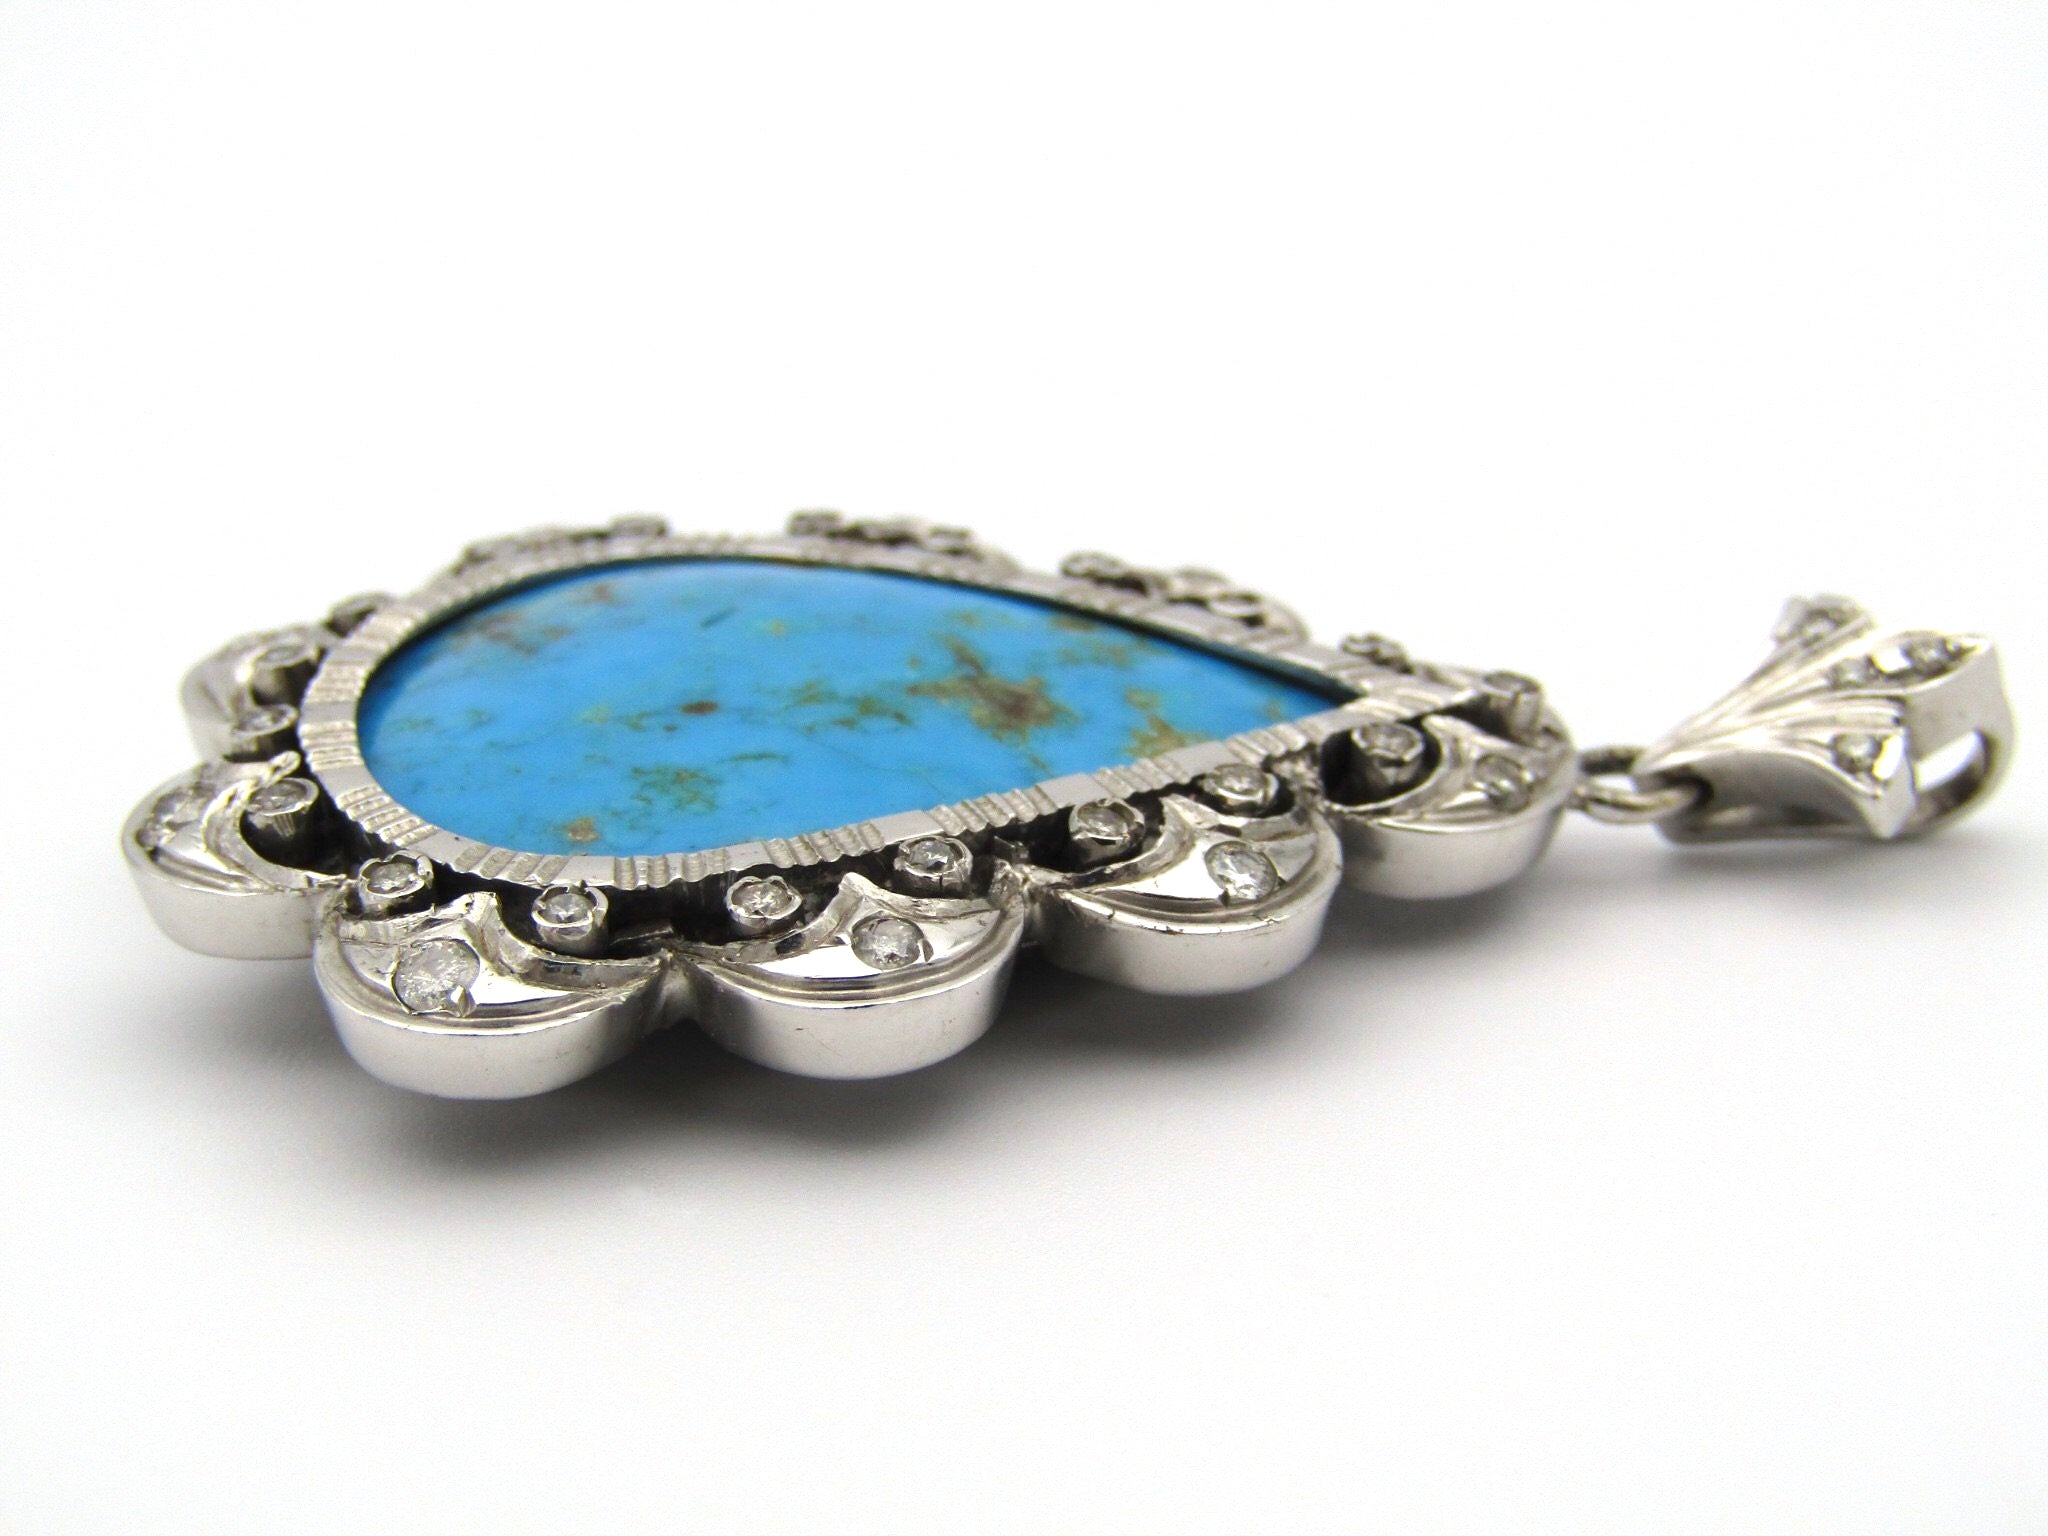 18kt white gold turquoise and diamond pendant.